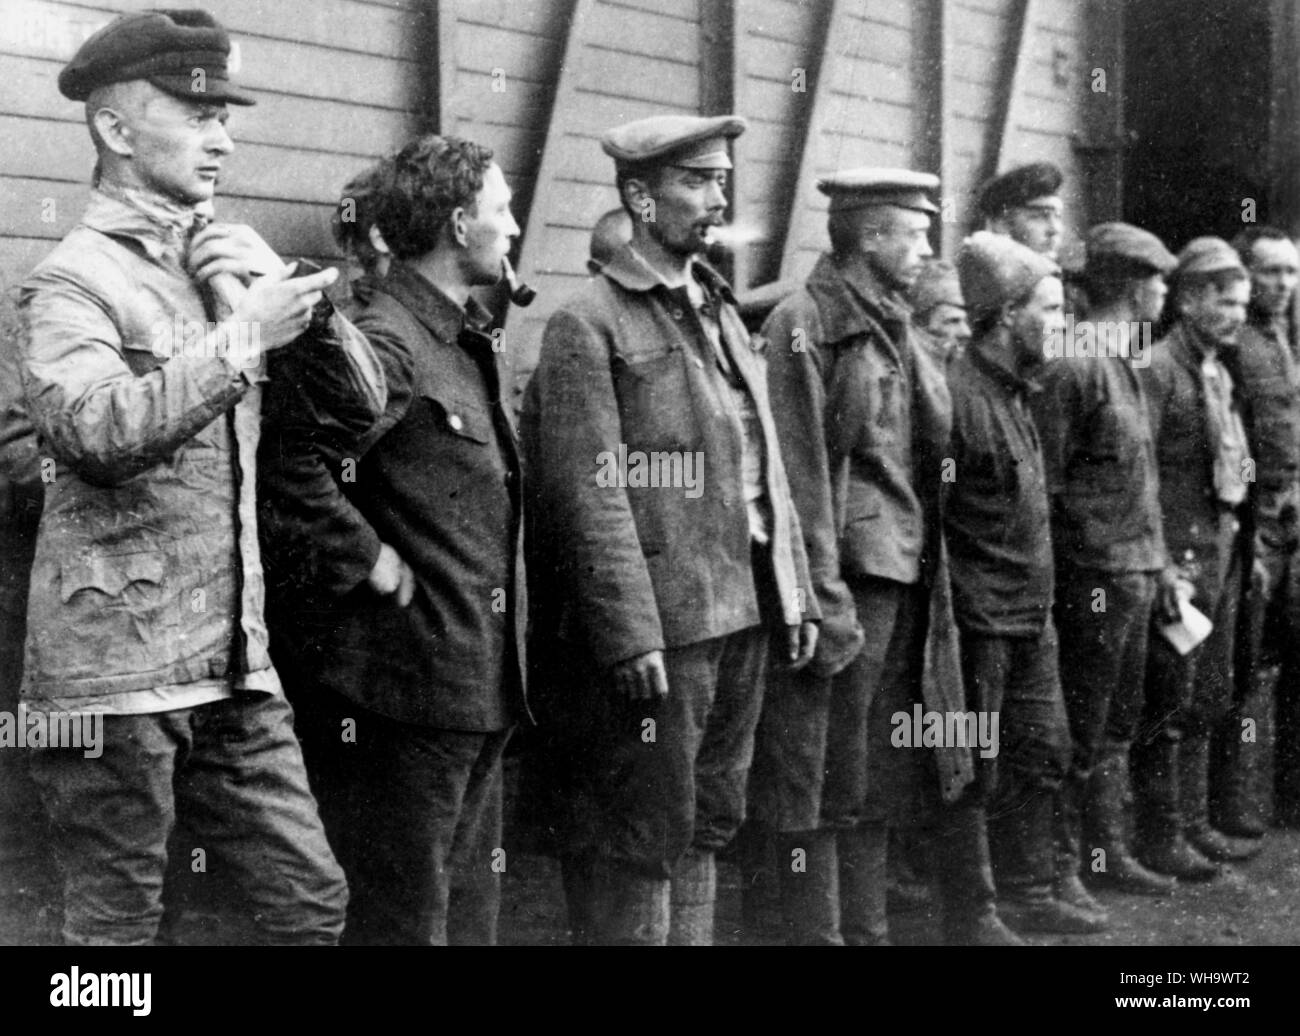 WW1/ Czech soldiers of the Red Army, sentenced to death, awaiting their execution in Petropavlovsk, 1918. Stock Photo